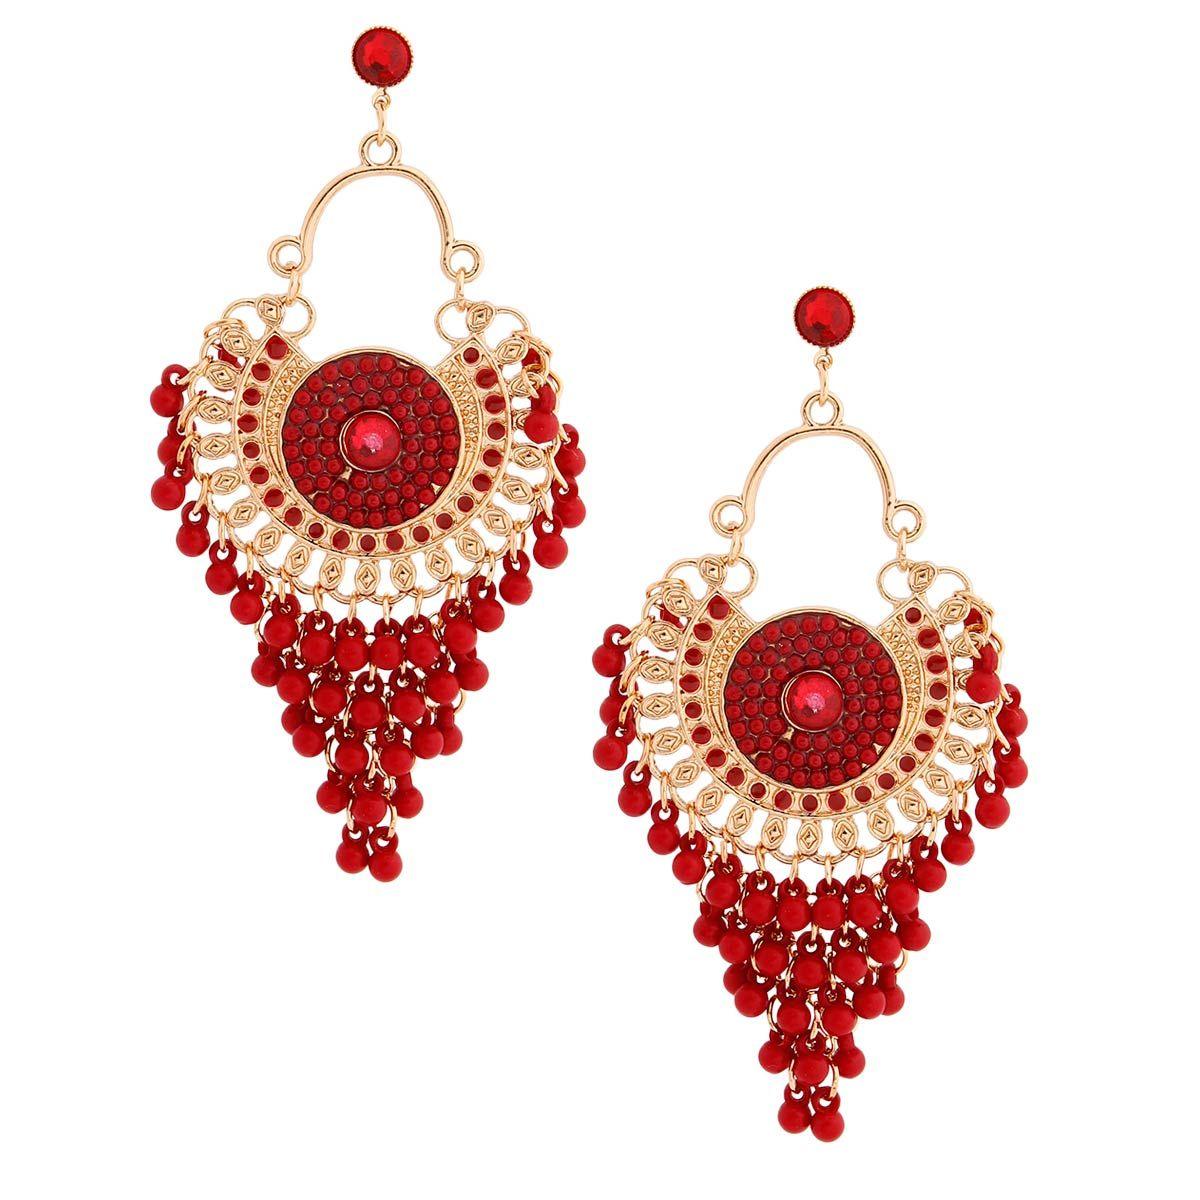 Stand Out from the Crowd with Red Beaded Chandelier Earrings